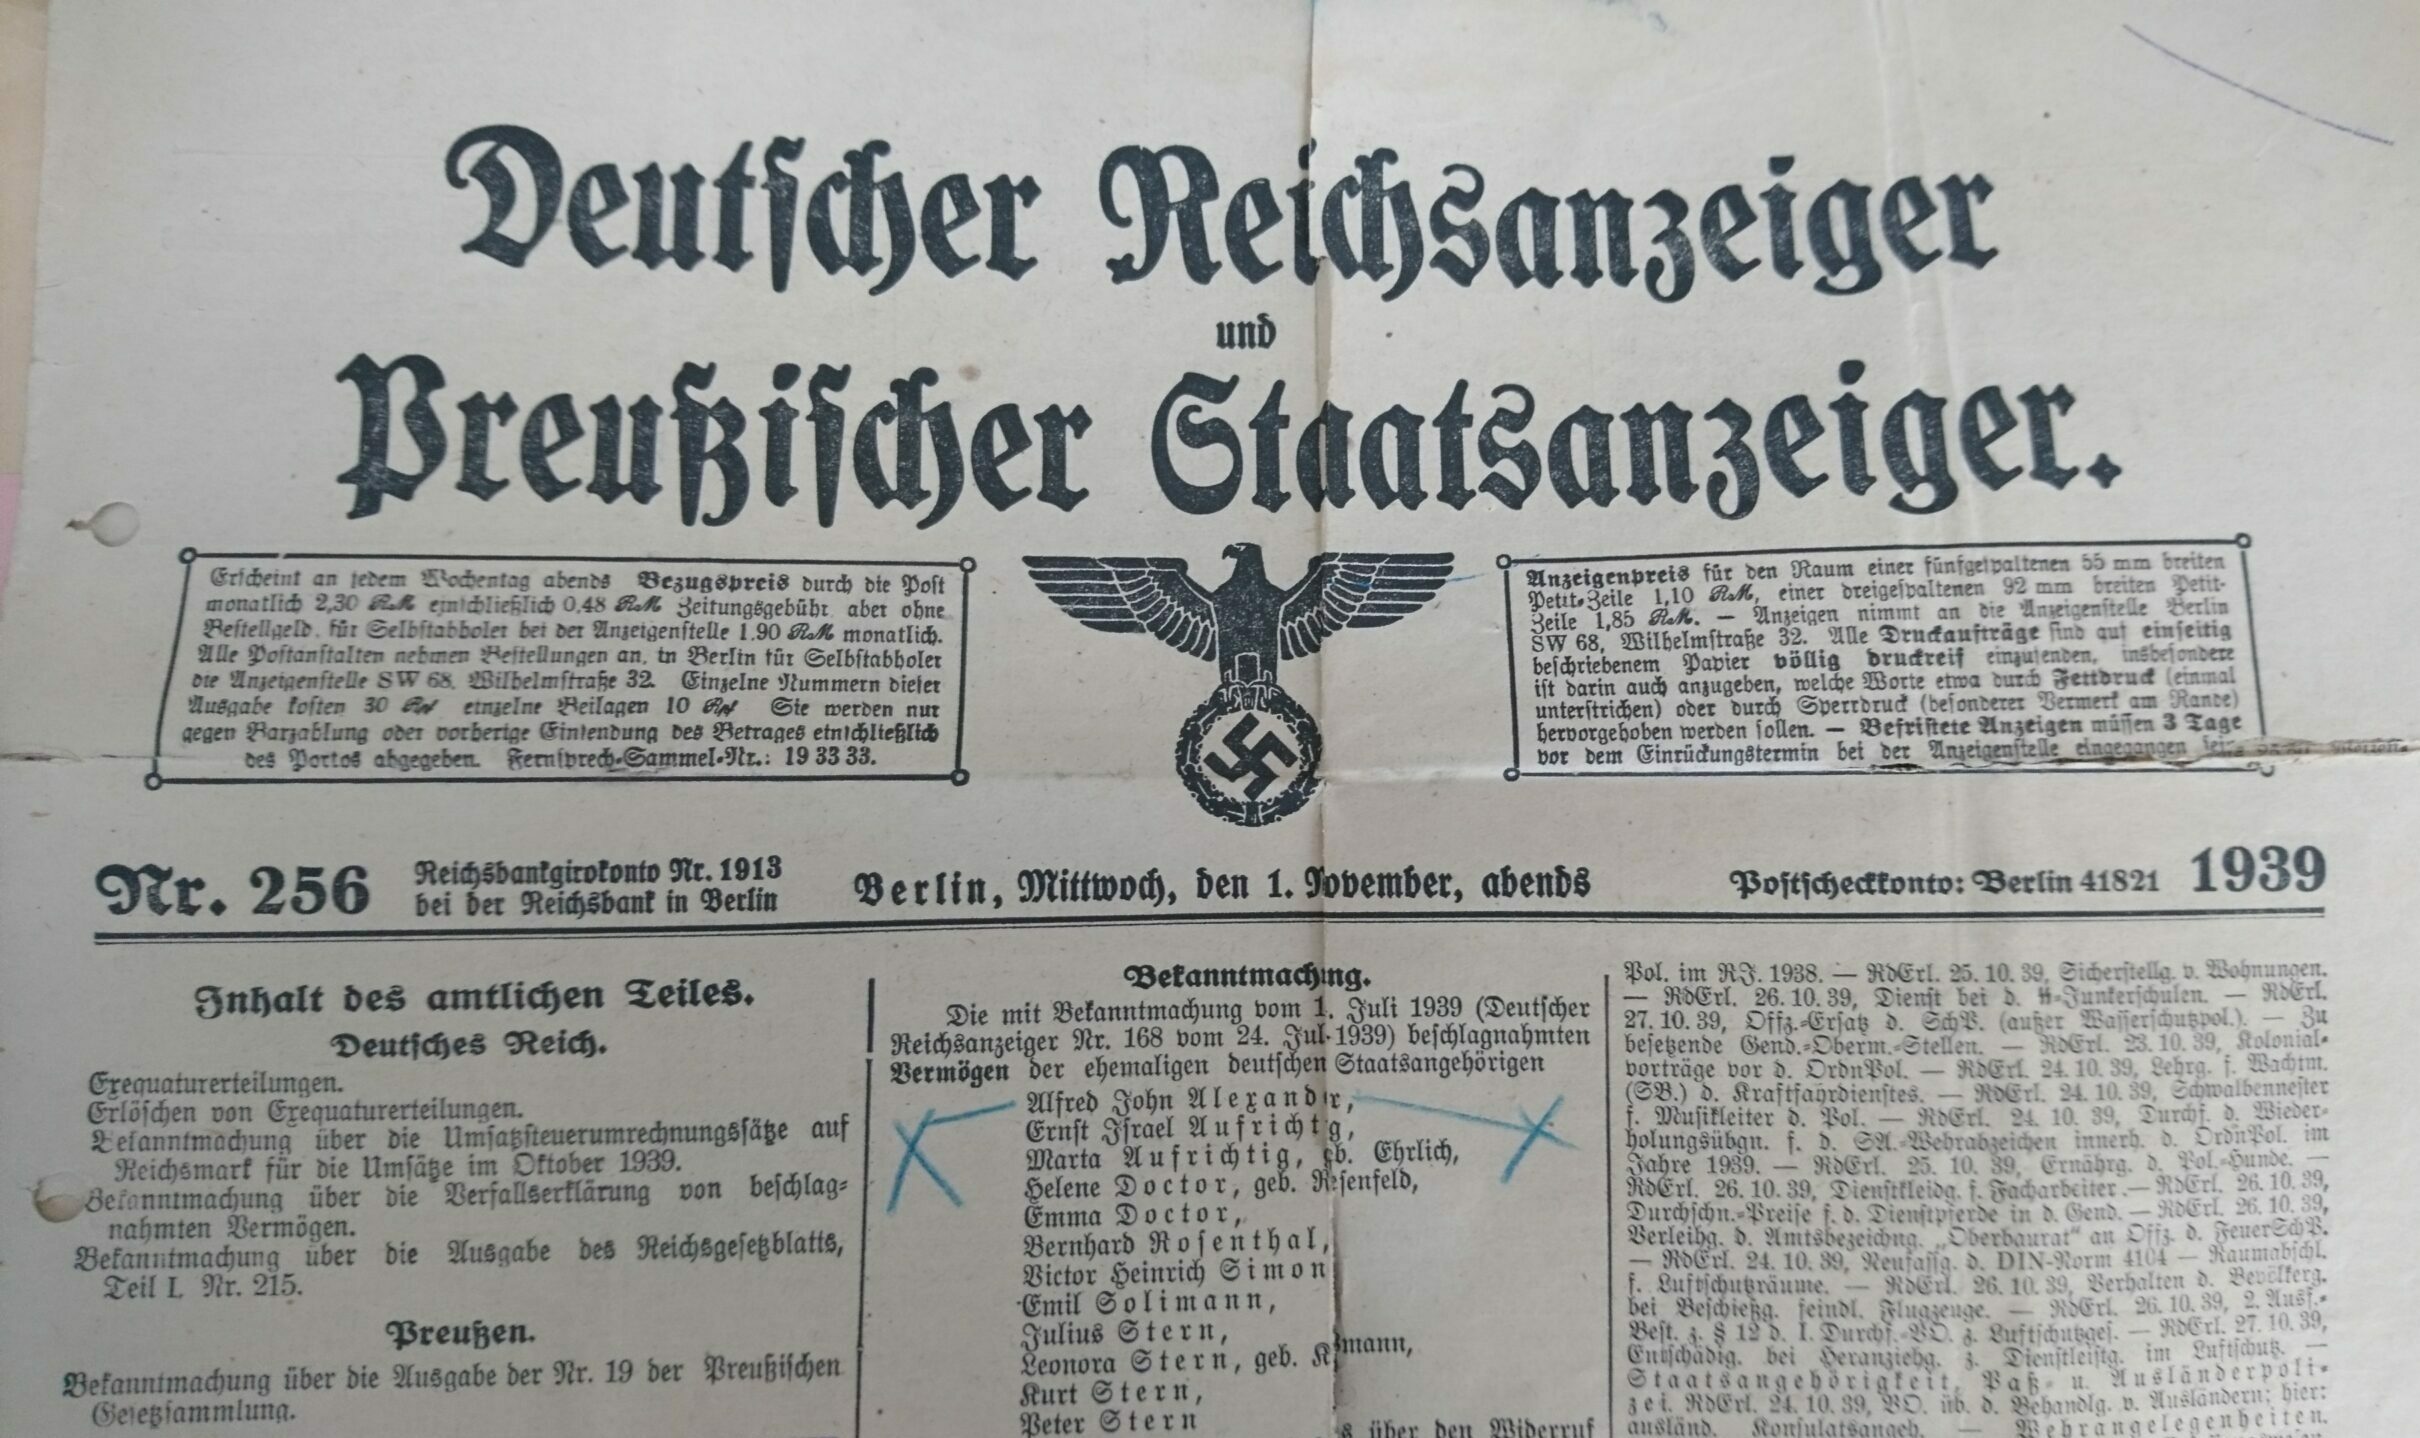 Confiscation of Alexander's property and revocation of his German citizenship in 1939, image source Entschädigungsbehörde (Compensation Authority) Berlin